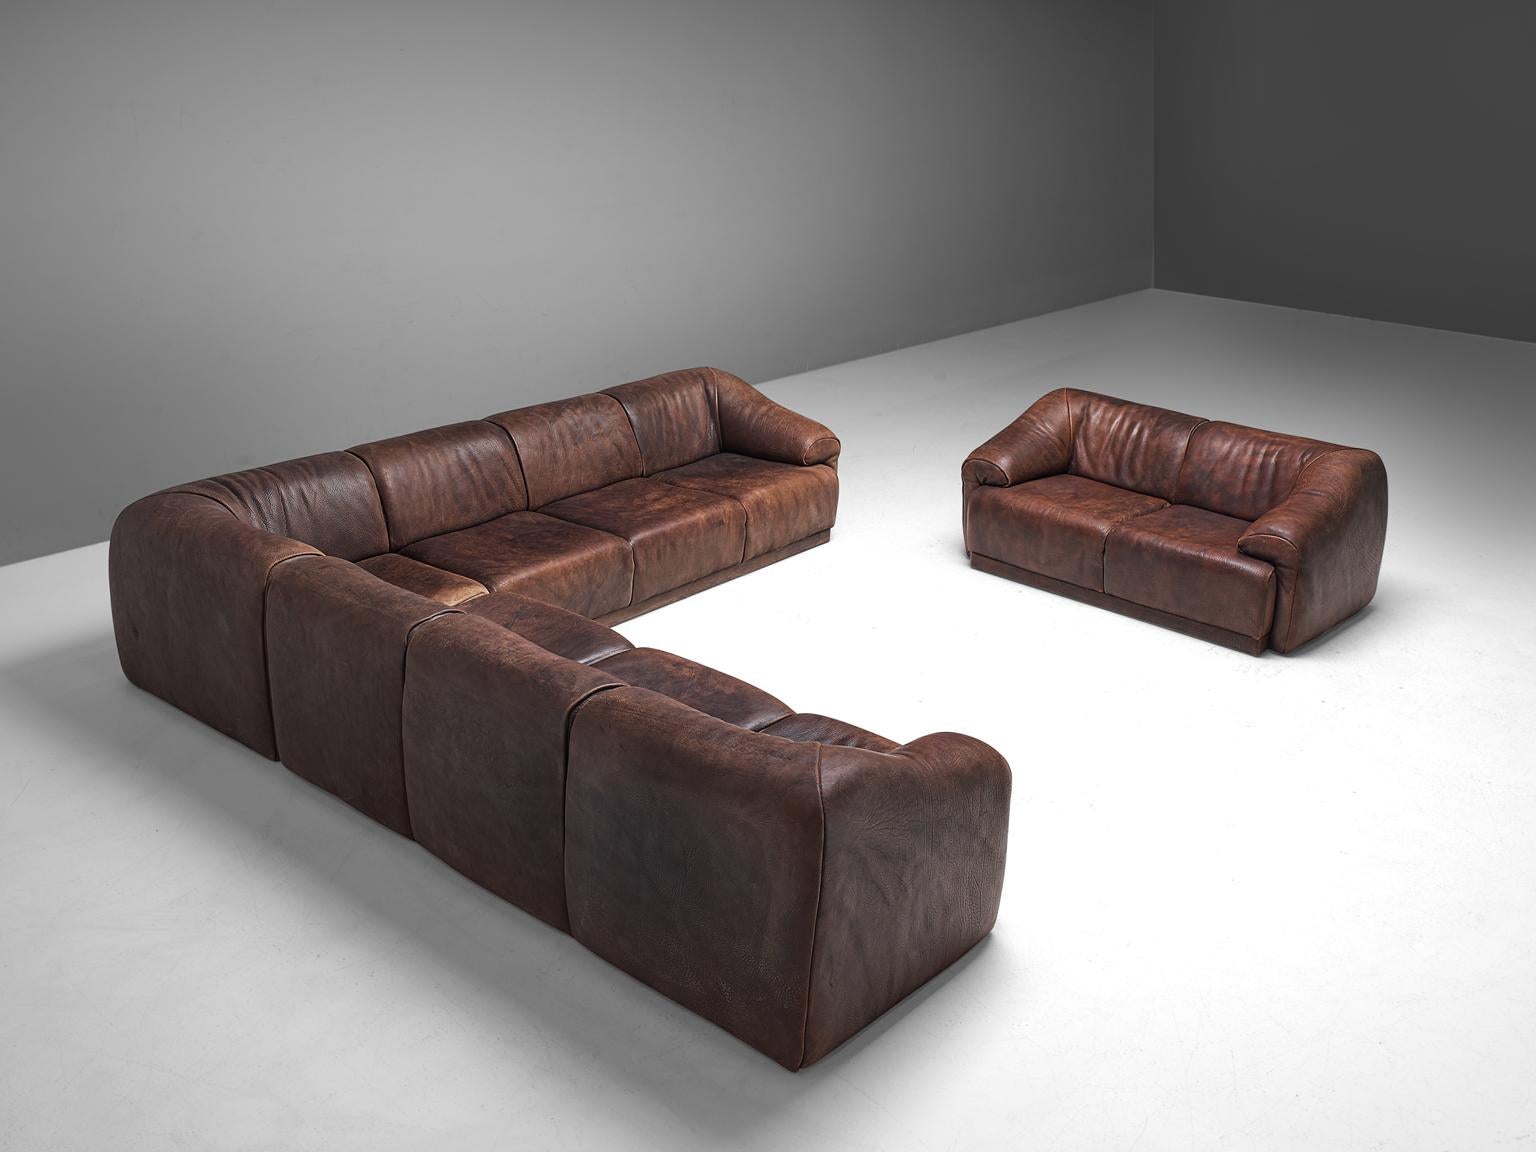 De Sede, lounge set, buffalo leather, Switzerland, circa 1970.

Comfortable lounge set designed and made by De Sede, Switzerland, 1970. This set contains a 2 seater sofa and a 8 element sectional sofa. Very comfortable set upholstered in high